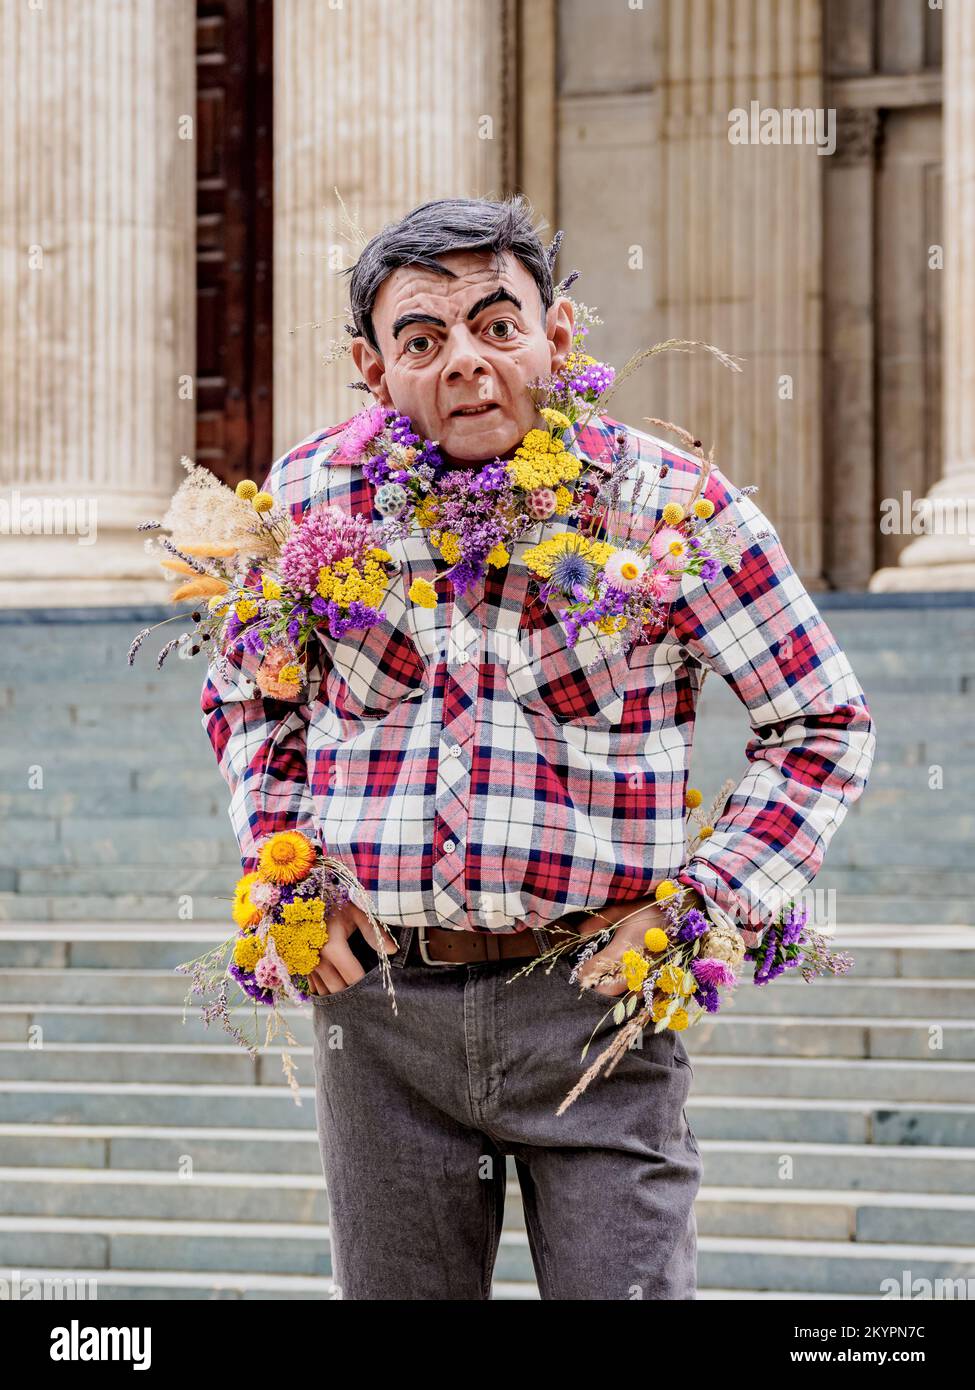 Mr. Bean Statue in front of the St Paul's Cathedral, London, England, United Kingdom Stock Photo